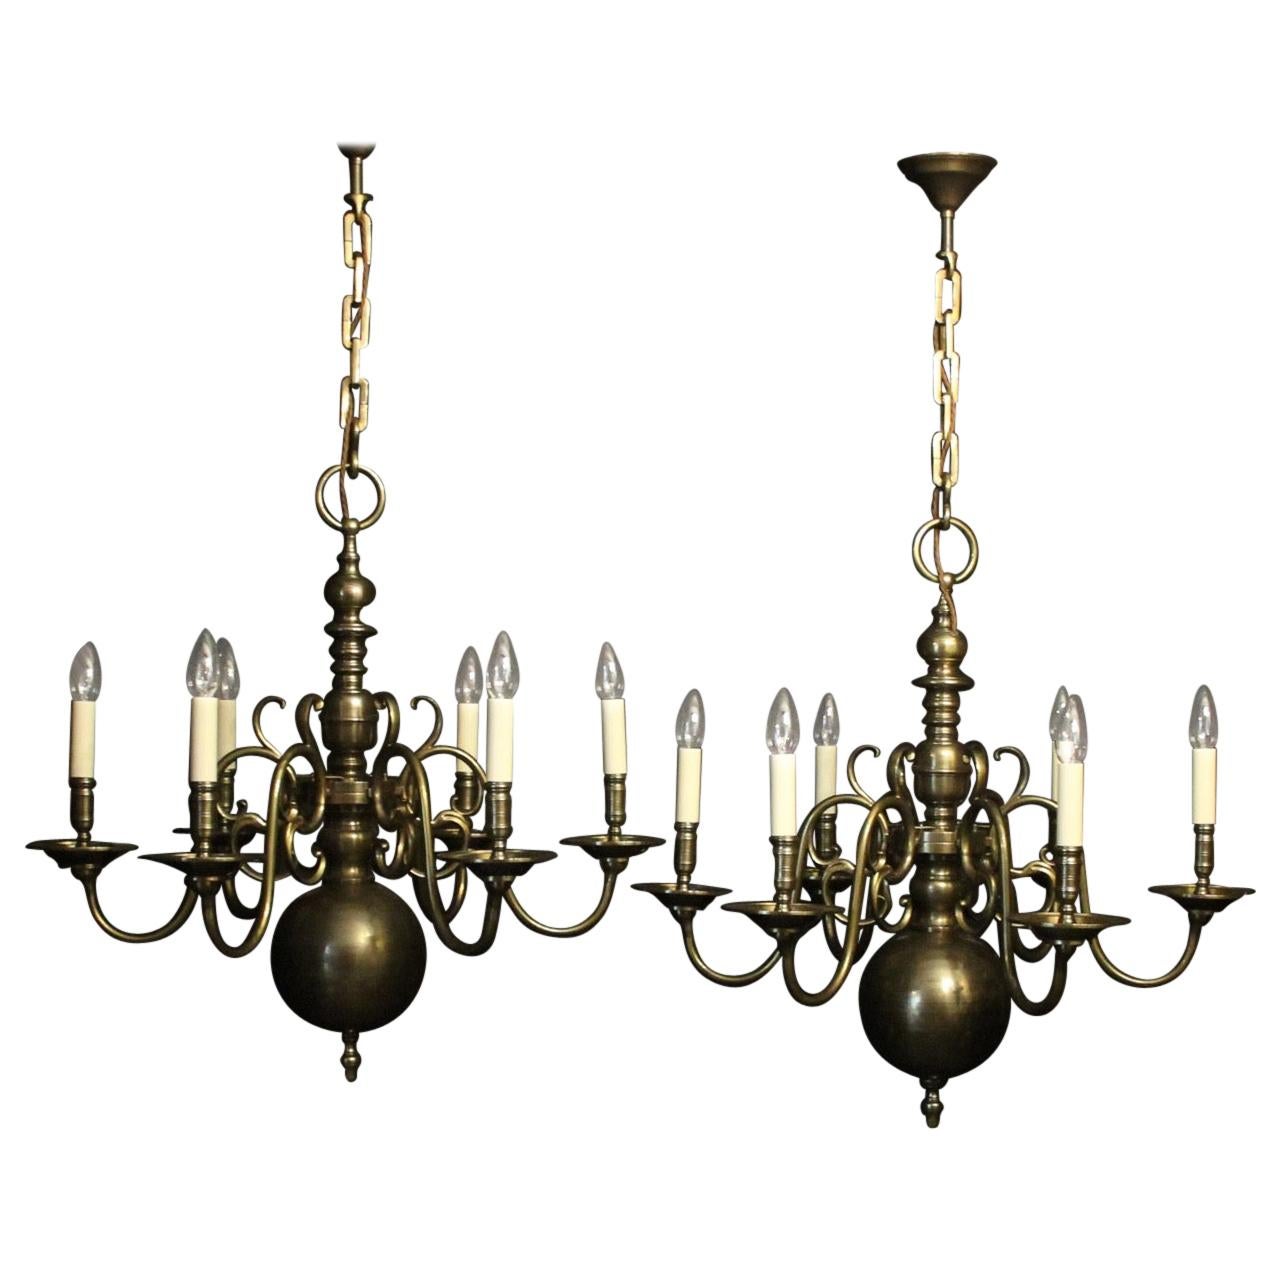 English Pair of 6-Light Bronze Antique Chandeliers For Sale